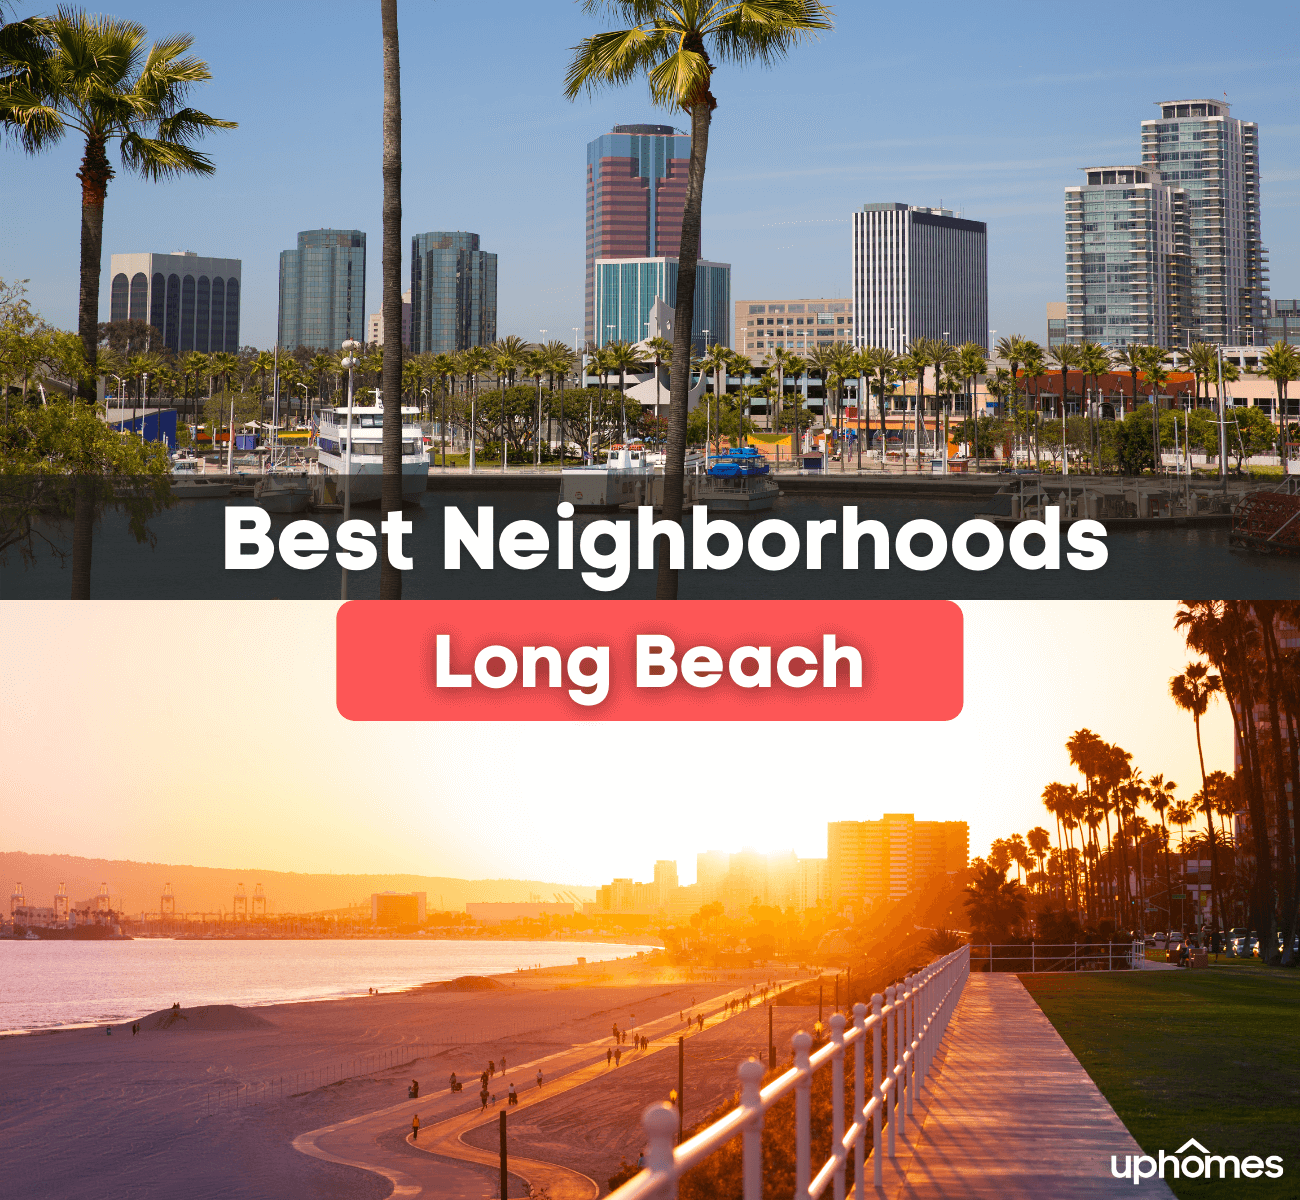 Best Neighborhoods in Long Beach California - What are the best places to live in Long Beach, CA?